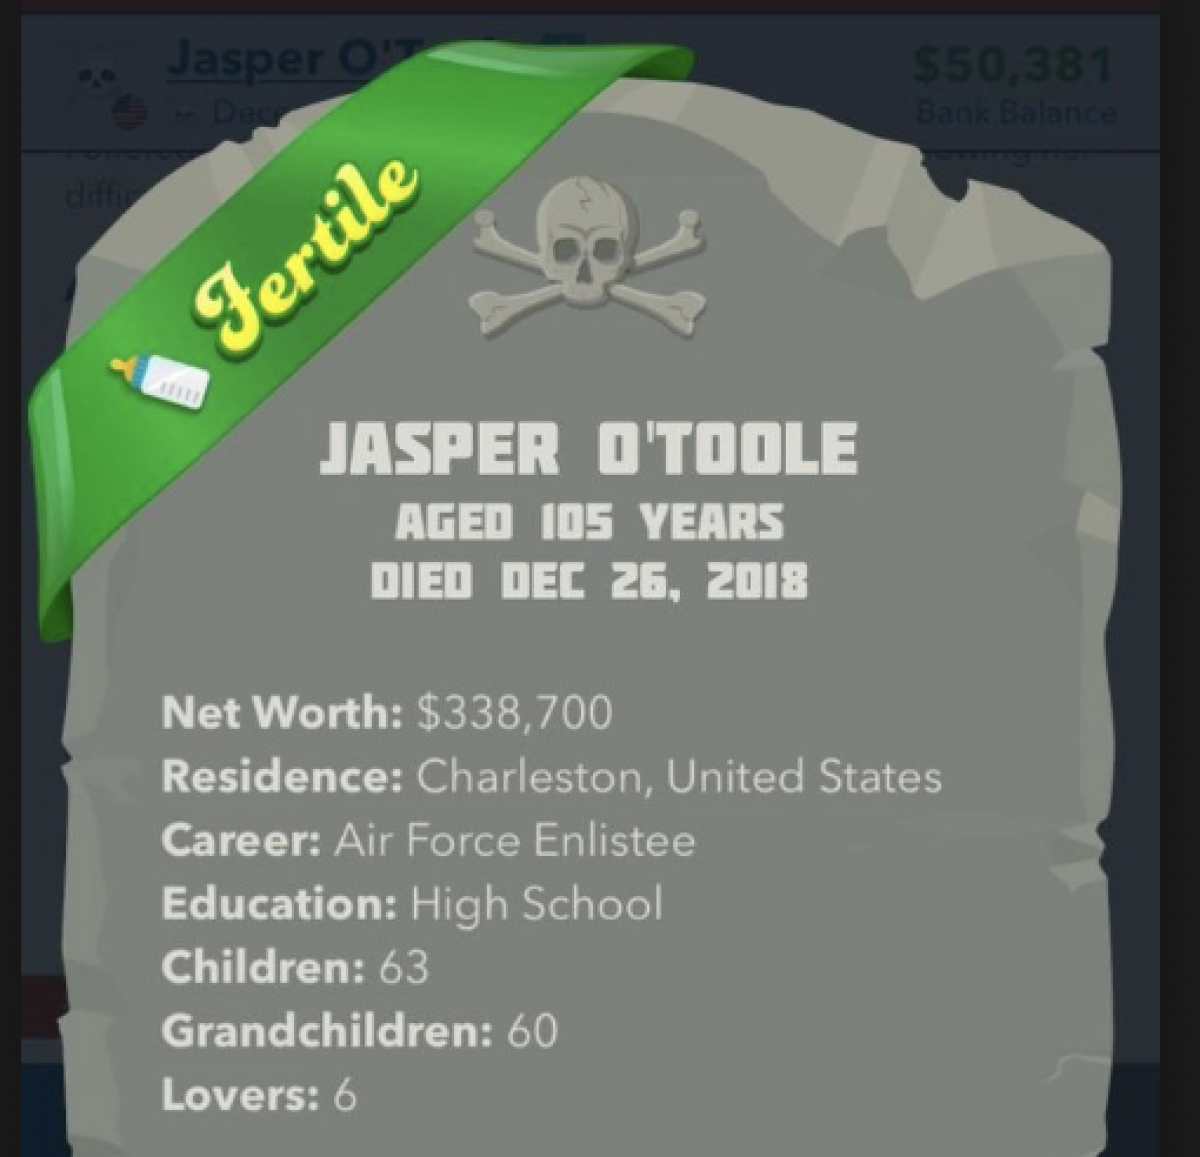 How to Escape Every Prison in BitLife? A 2023 Complete Guide